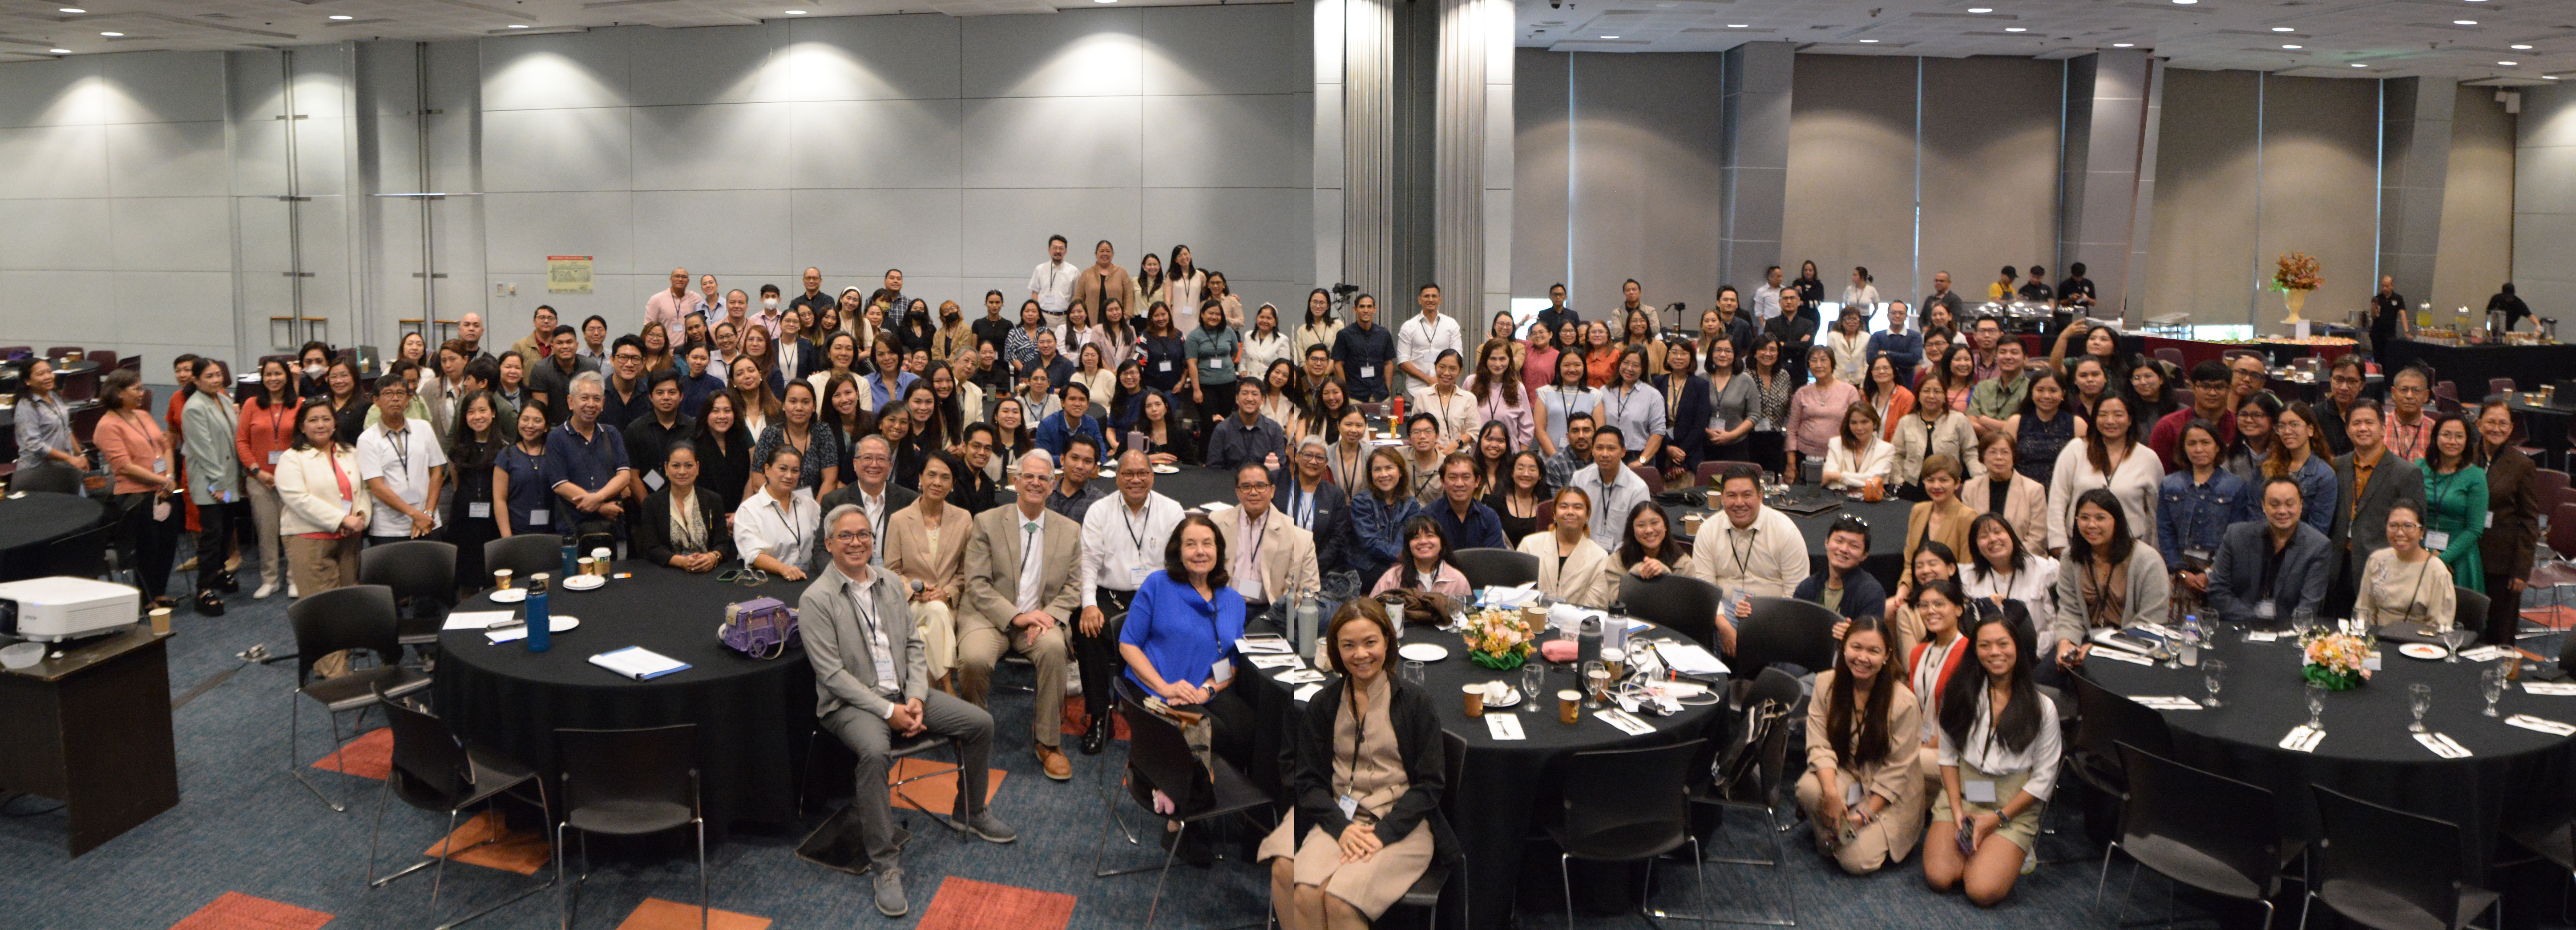 Featured image for the article Ateneo School of Medicine and Public Health Hosts Inaugural Asian Functional Medicine Conference